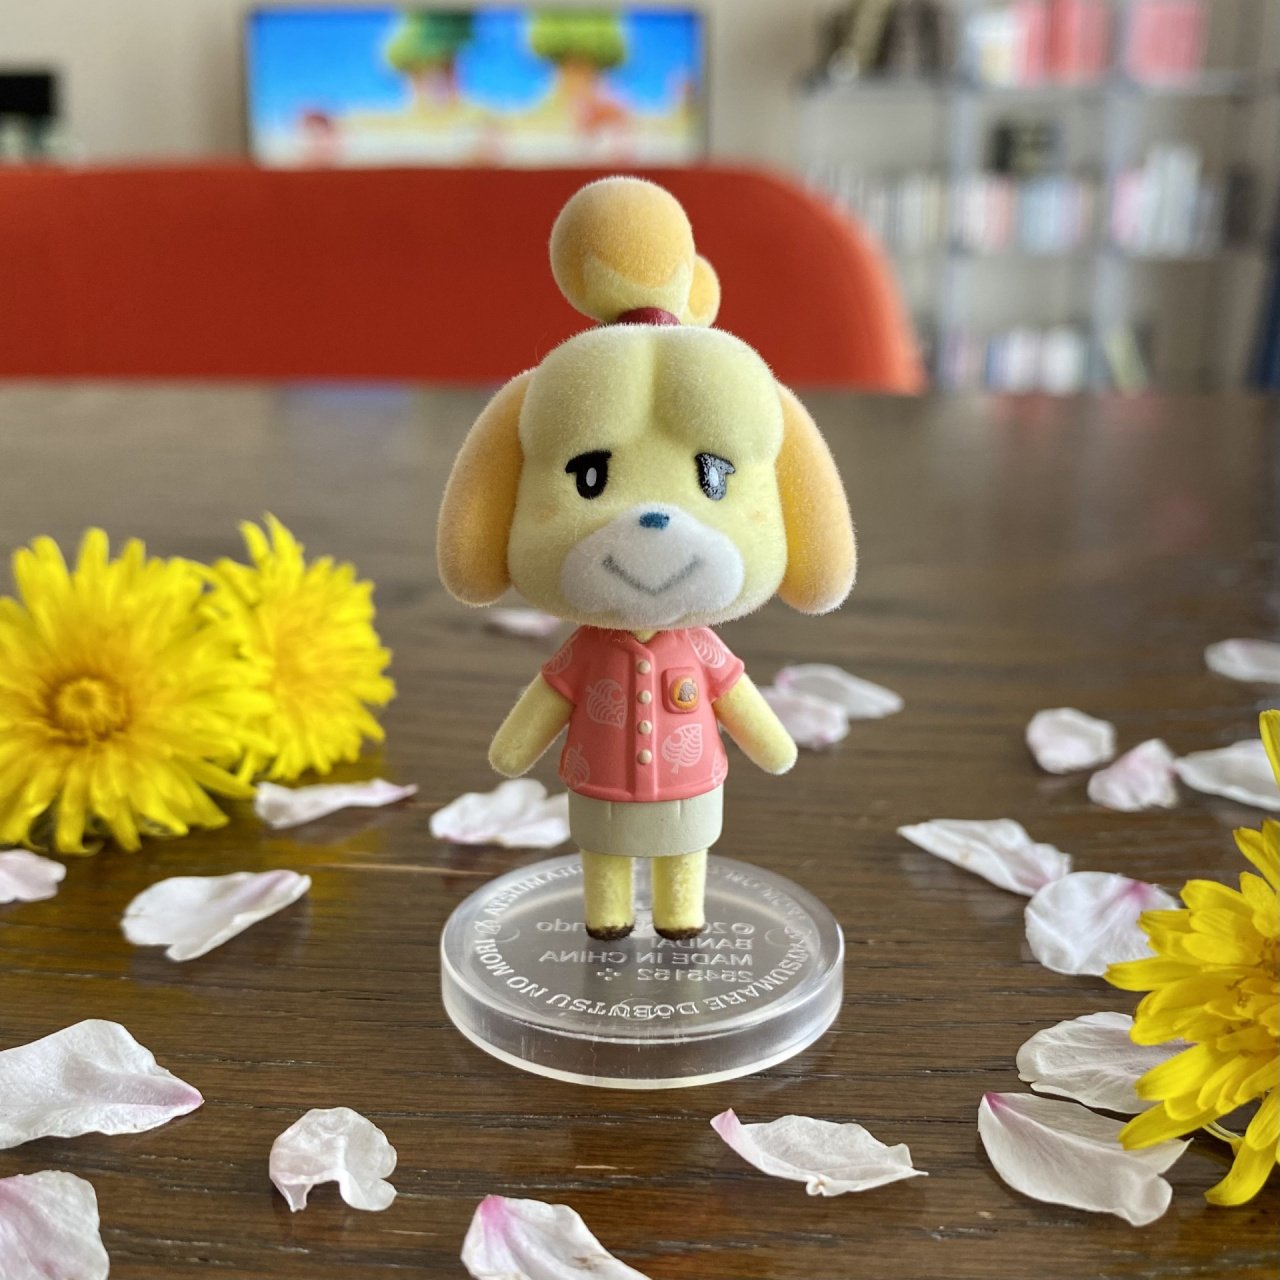 These Japan-Only Animal Crossing Figurines Are So Darn Cute, Fans Are  Struggling To Find Them - Feature | Nintendo Life